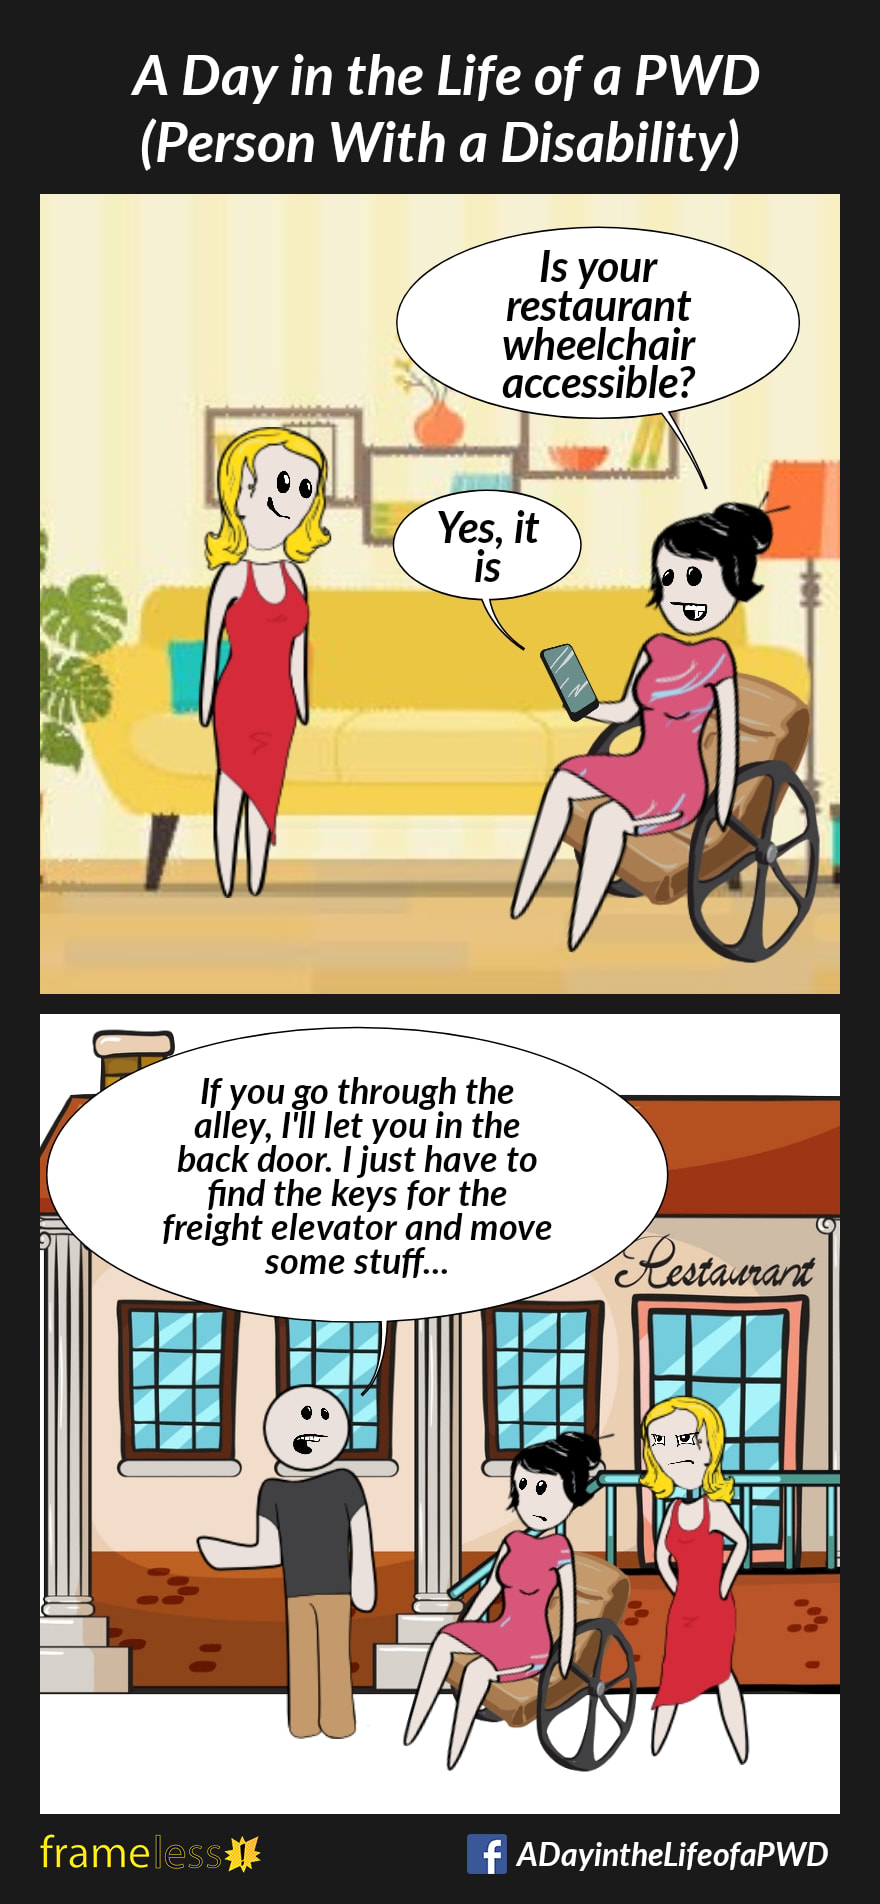 COMIC STRIP 
A Day in the Life of a PWD (Person With a Disability) 

Frame 1:
A woman in a wheelchair is on the phone with a restaurant employee. Her partner listens in.
WOMAN: Is your restaurant wheelchair accessible?
EMPLOYEE: Yes, it is

Frame 2:
The woman and her partner are talking to a waiter in front of the restaurant, which has stairs leading to the front door. 
WAITER: If you go through the alley, I'll let you in the back door. I just have to find the keys for the freight elevator and move some stuff...